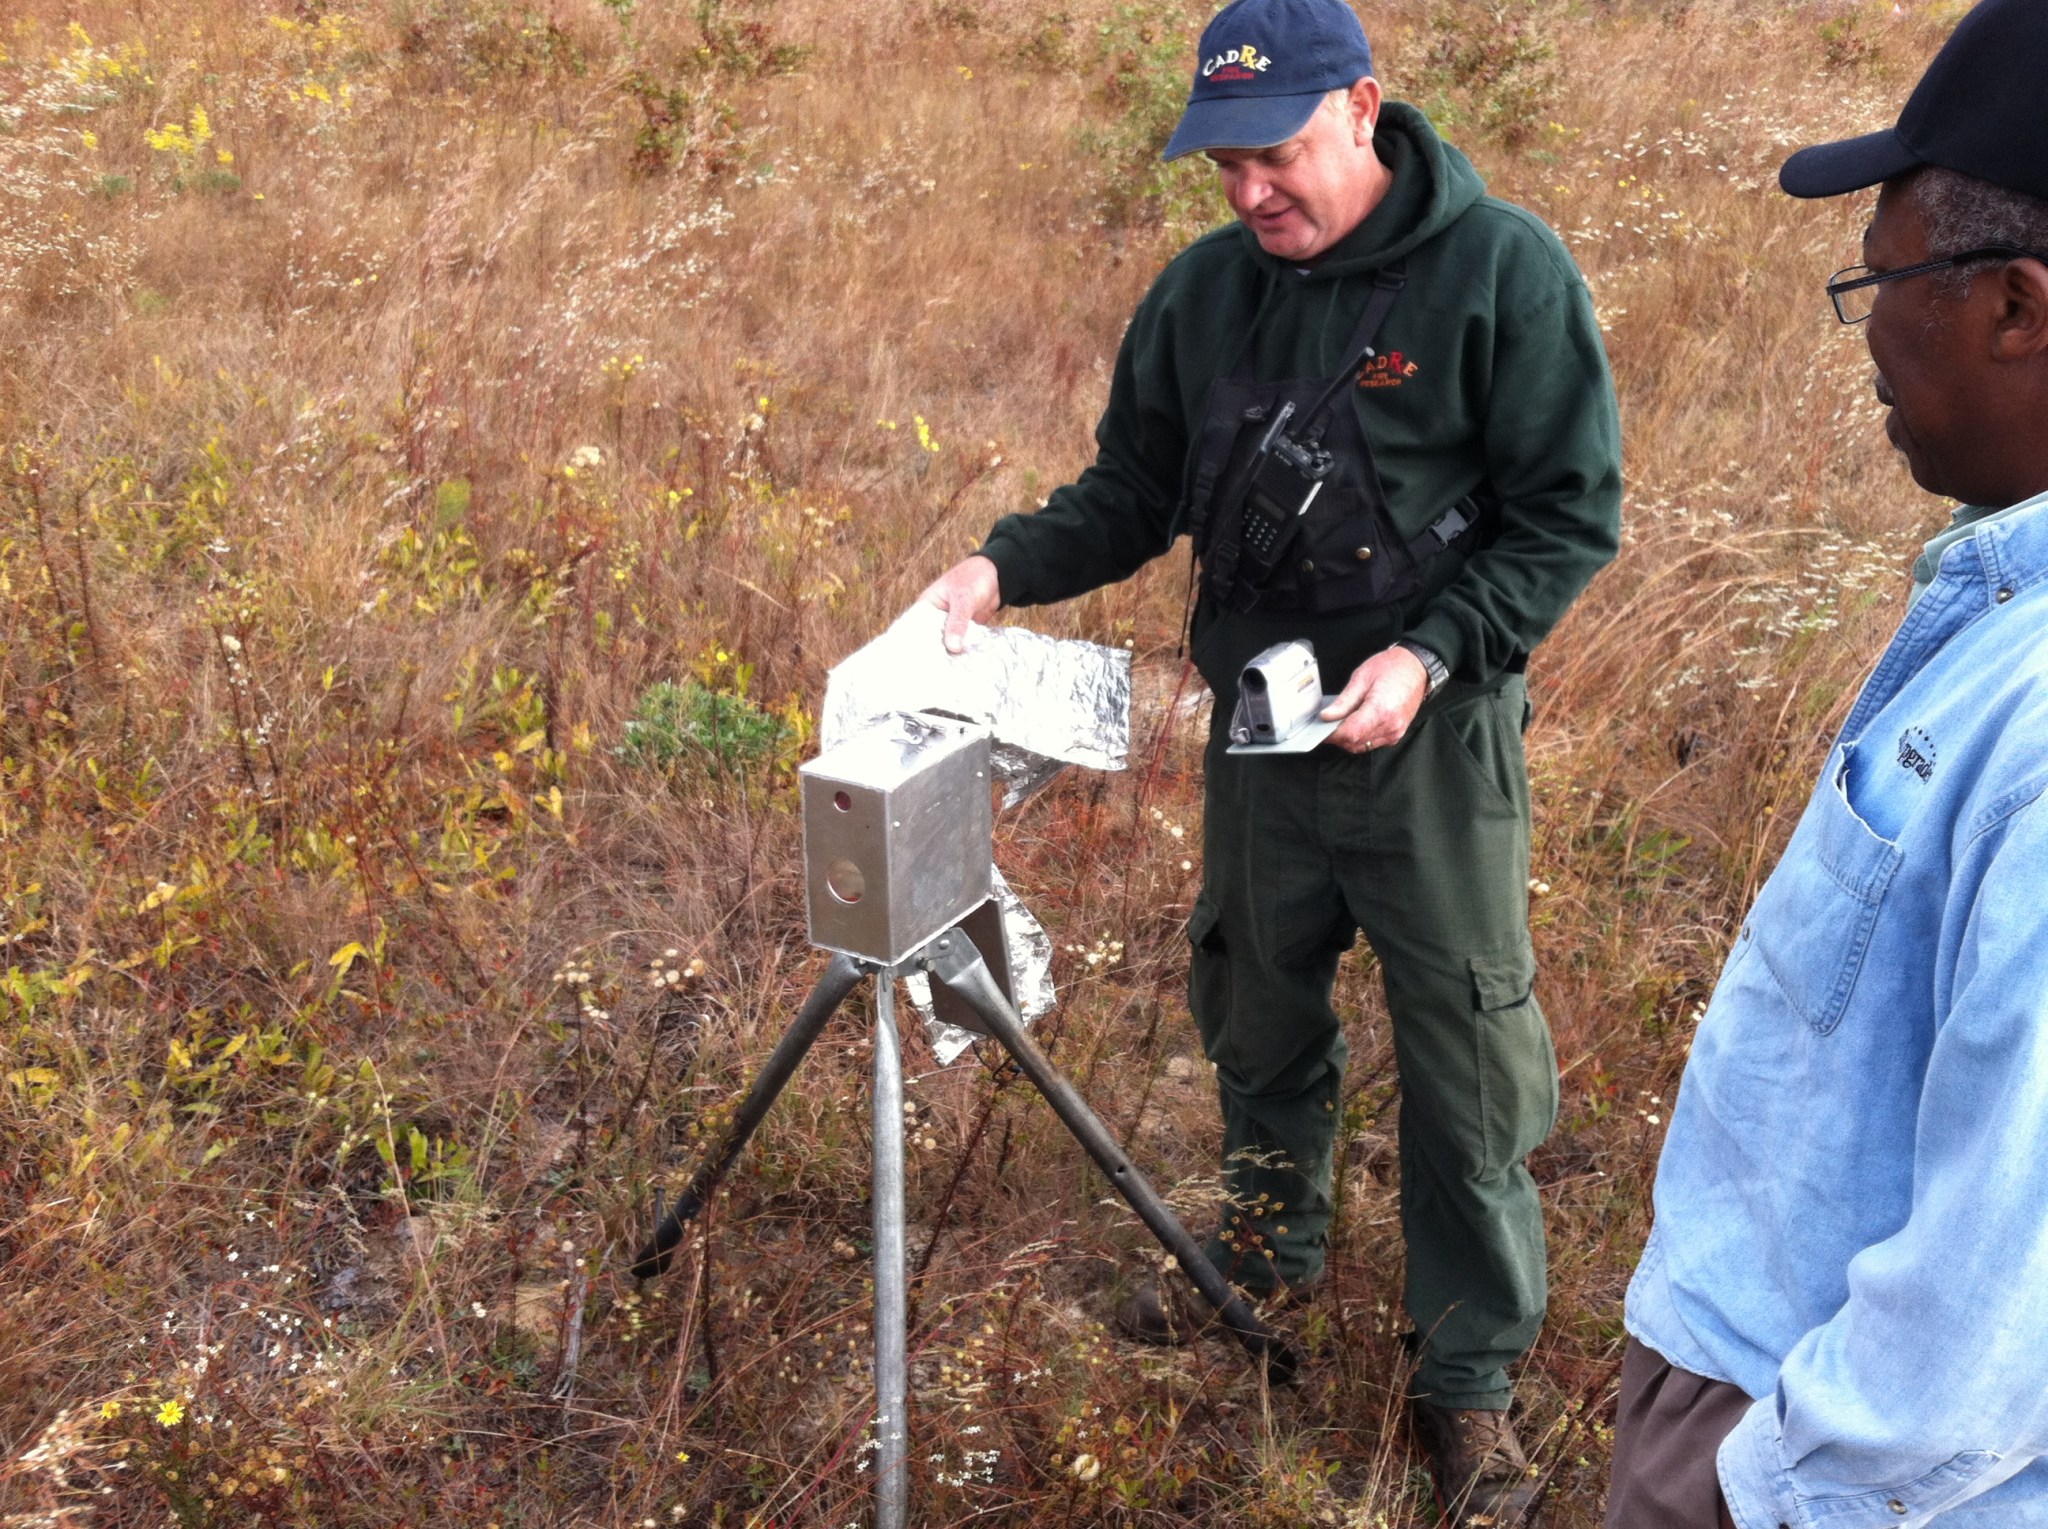 Ichoku watches as one of the Forest Service Scientists sets up a ground-based instrument before the prescribed fires in the Flor